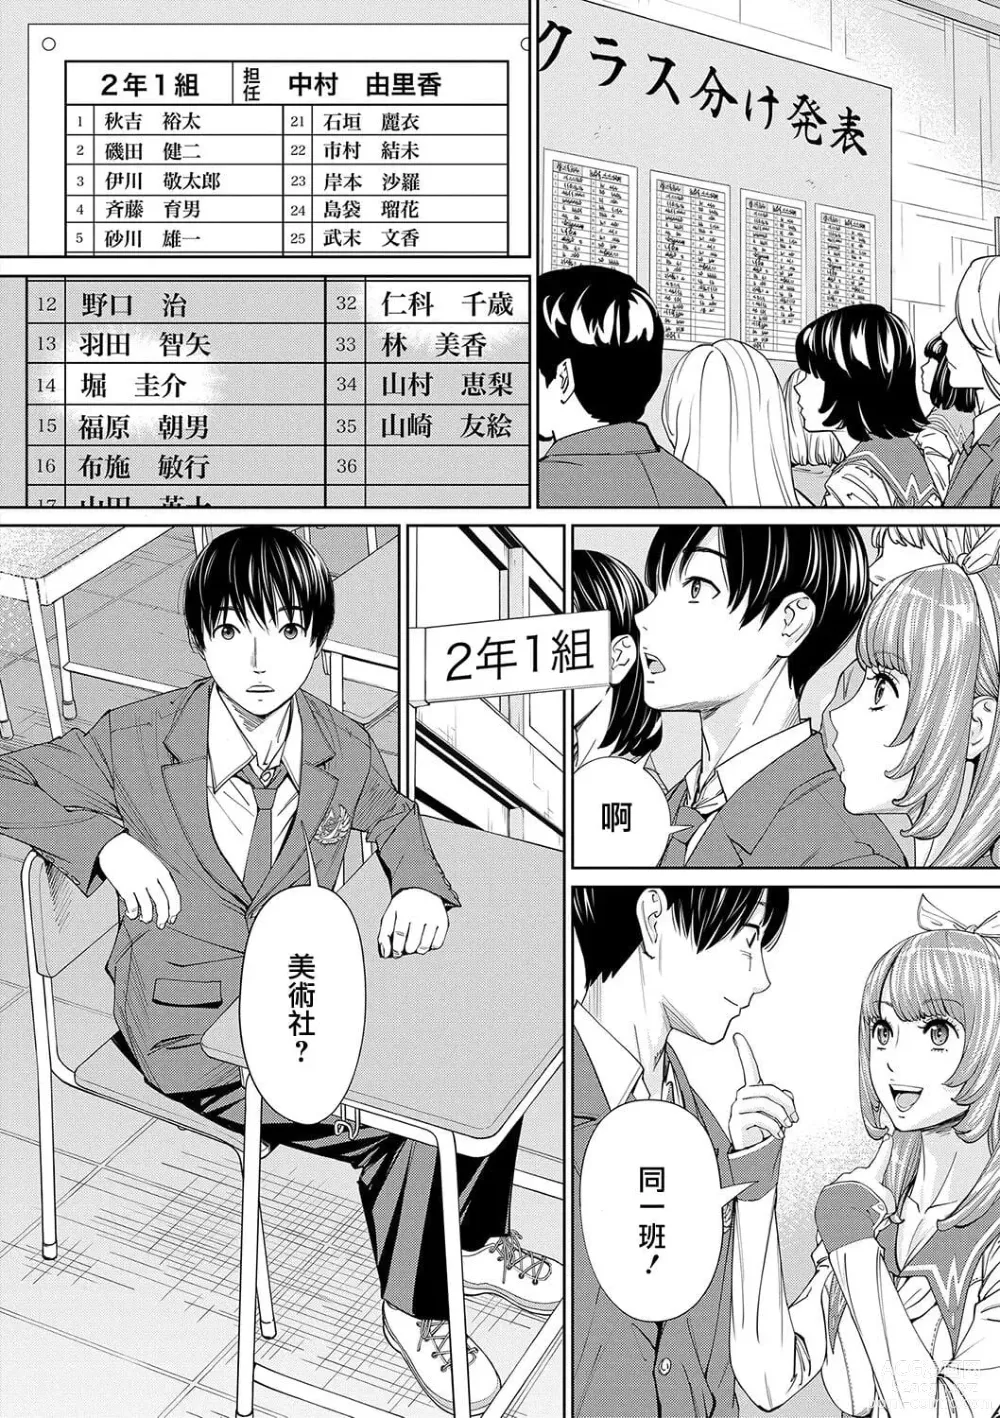 Page 22 of doujinshi 千歳+有罪